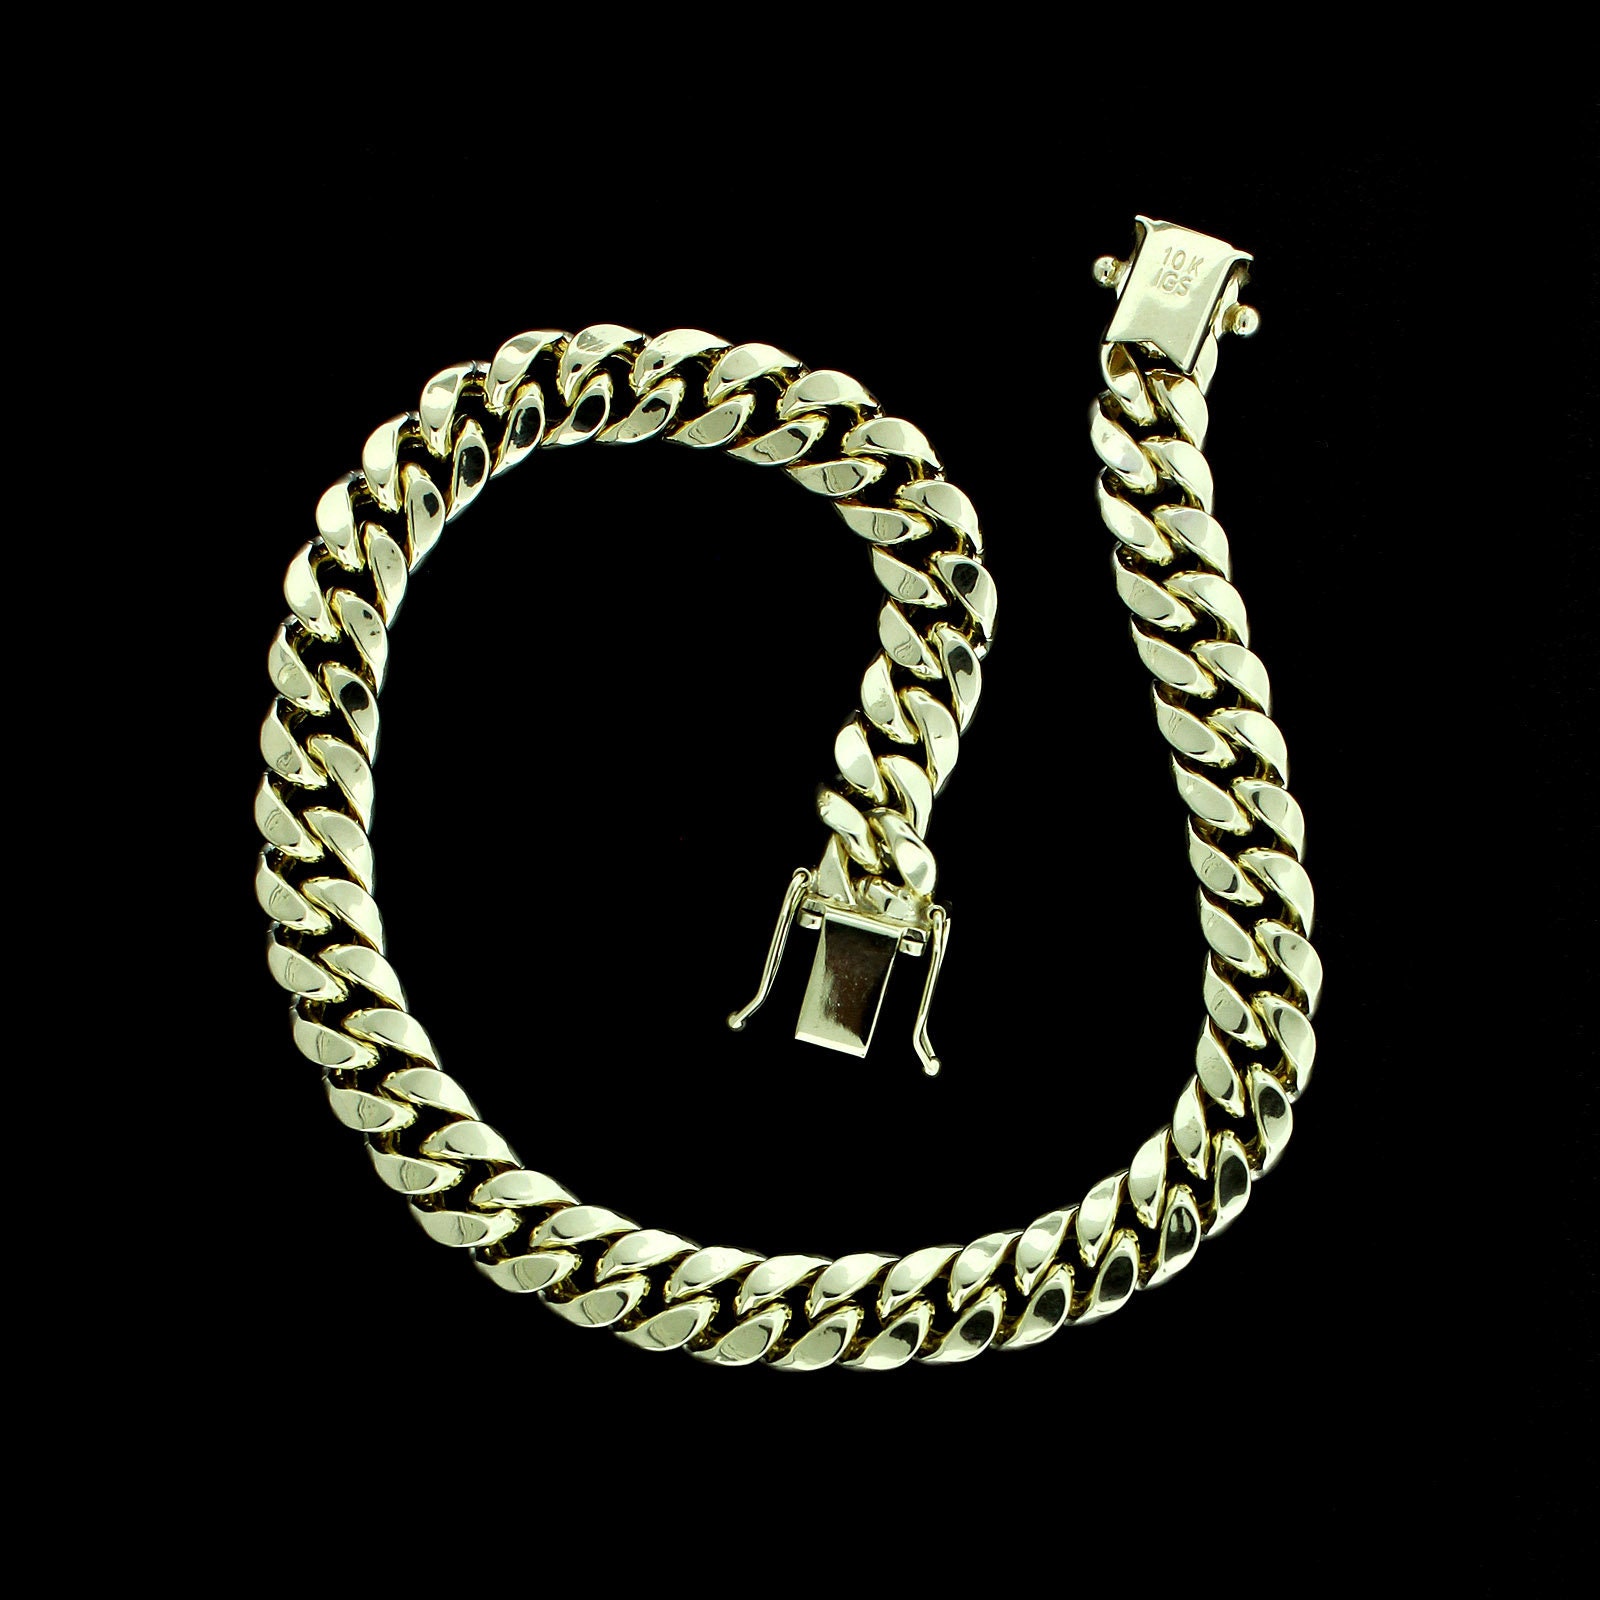 10k HOLLOW SOLID Yellow Gold Miami Cuban Link Chain Necklace 4.5-7mm 18-26  Box Lock - 4.5mm / 18 / 10K